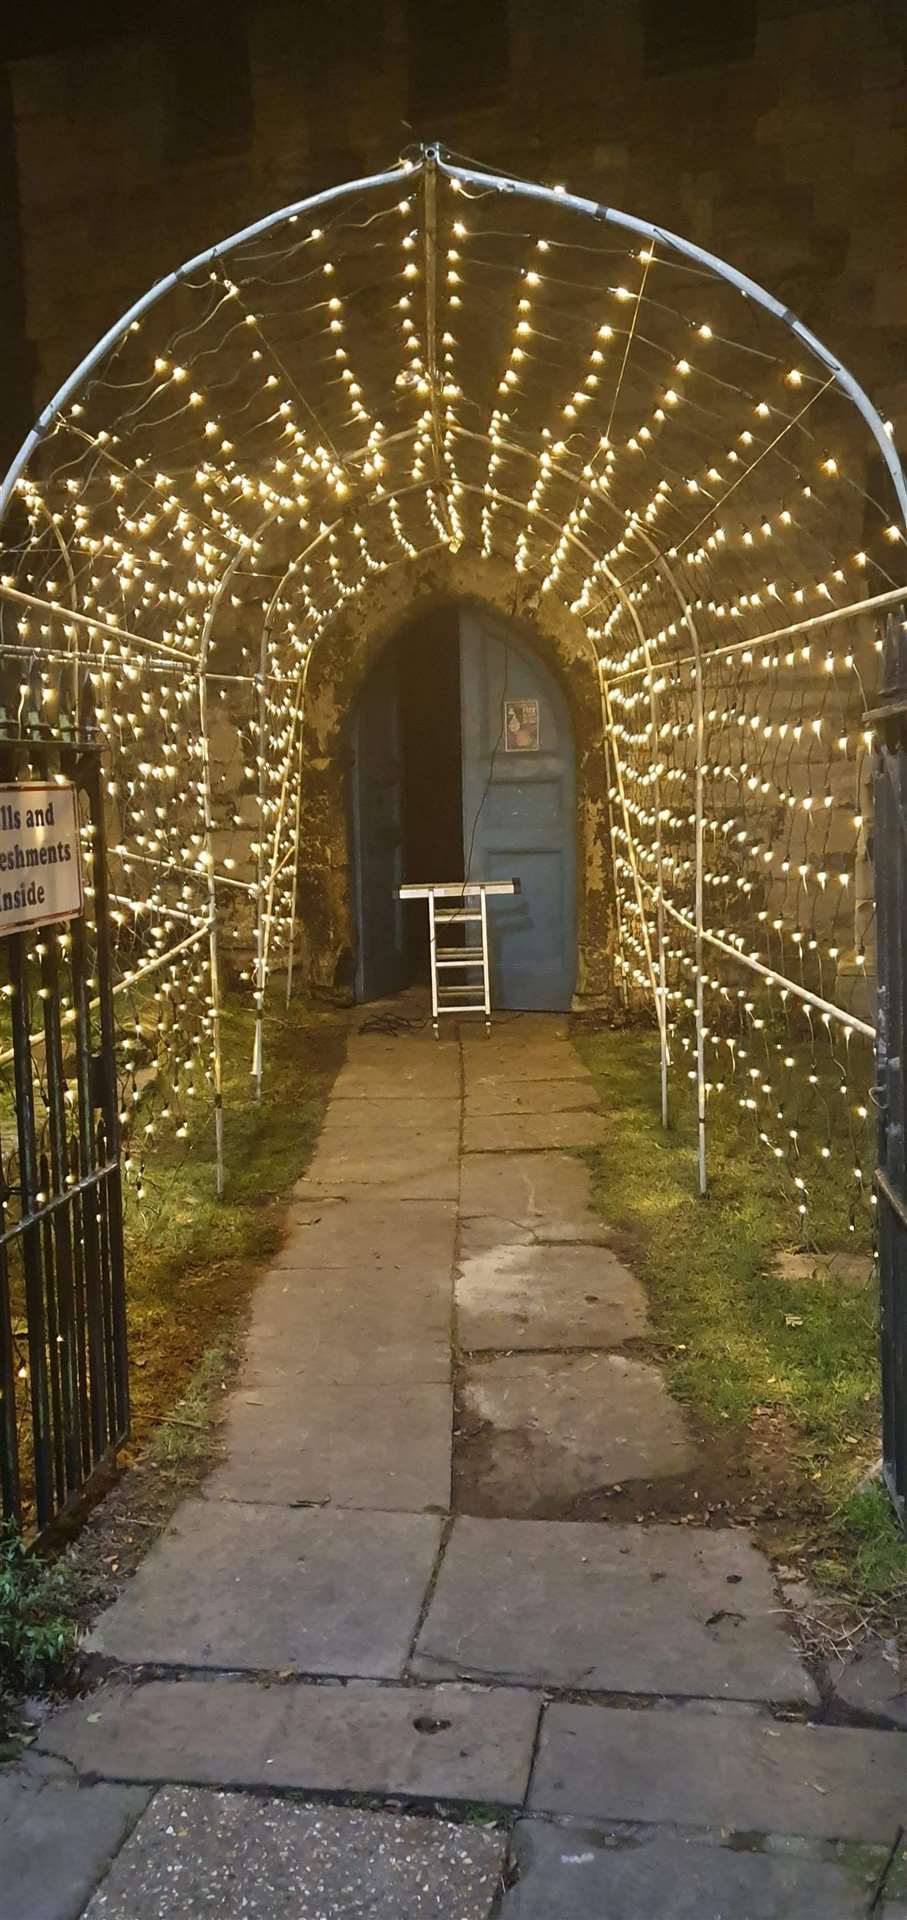 The lights tunnel outside St Peter's Church in Sandwich